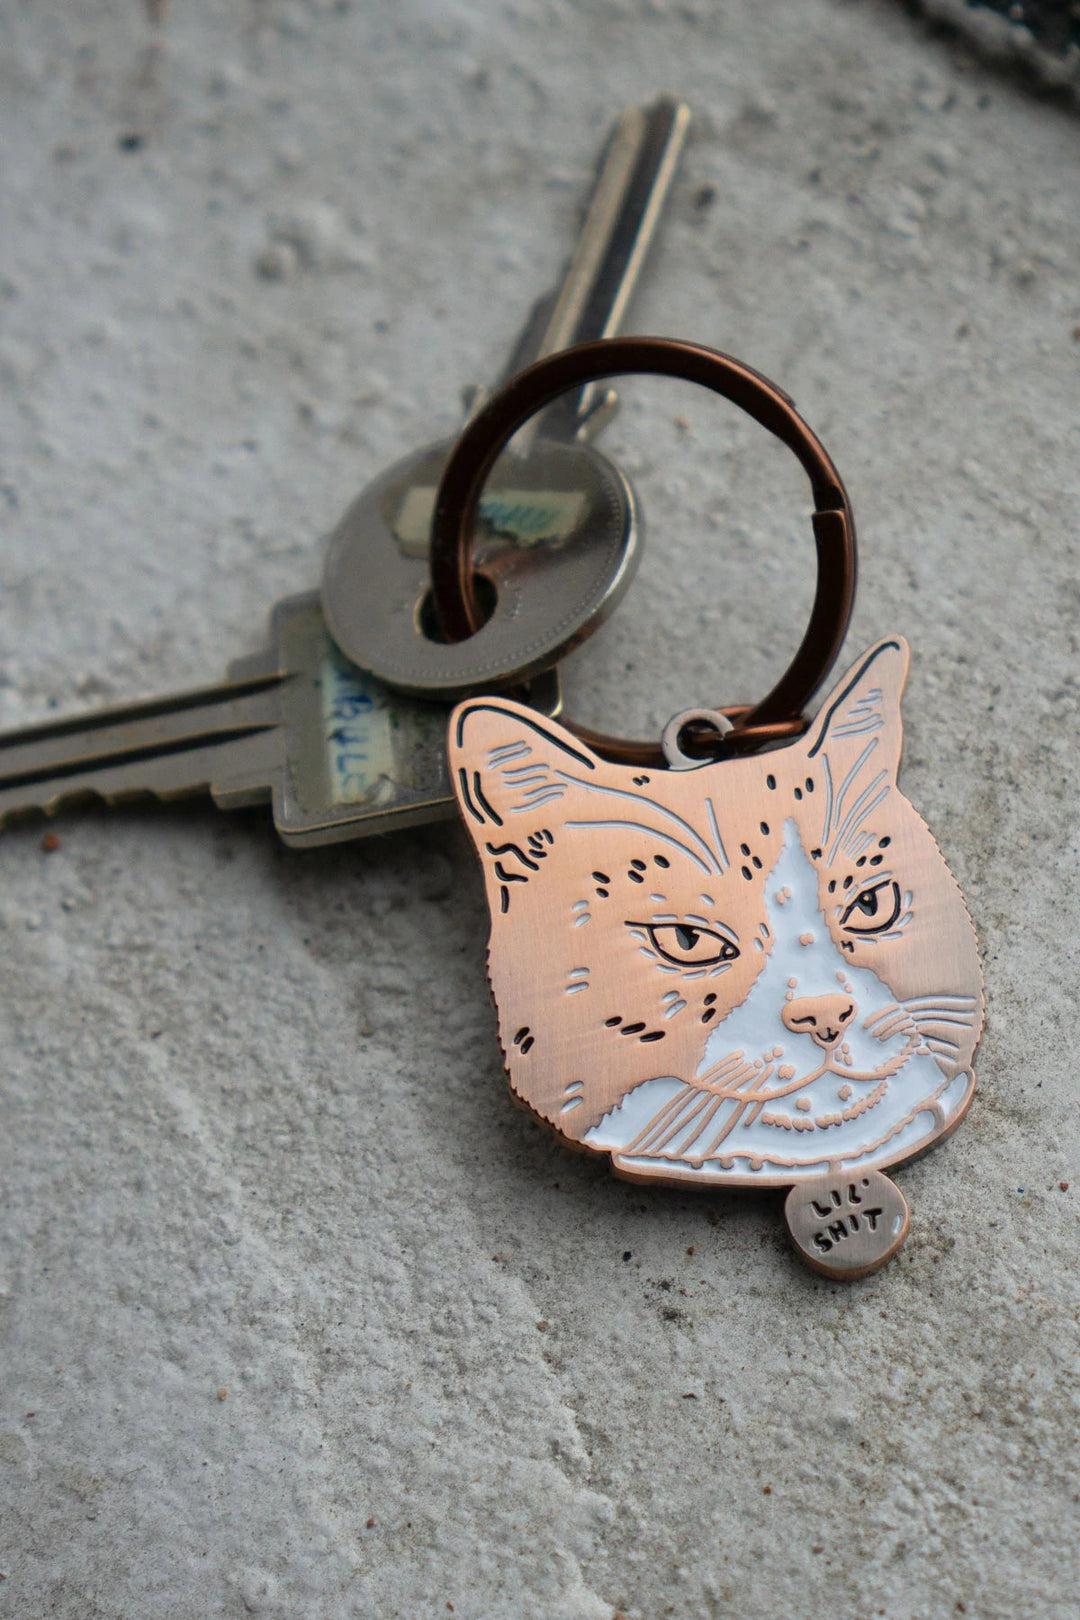 Lil' Shit Keychain | Stay Home Club - Pretty by Her- handmade locally in Cambridge, Ontario